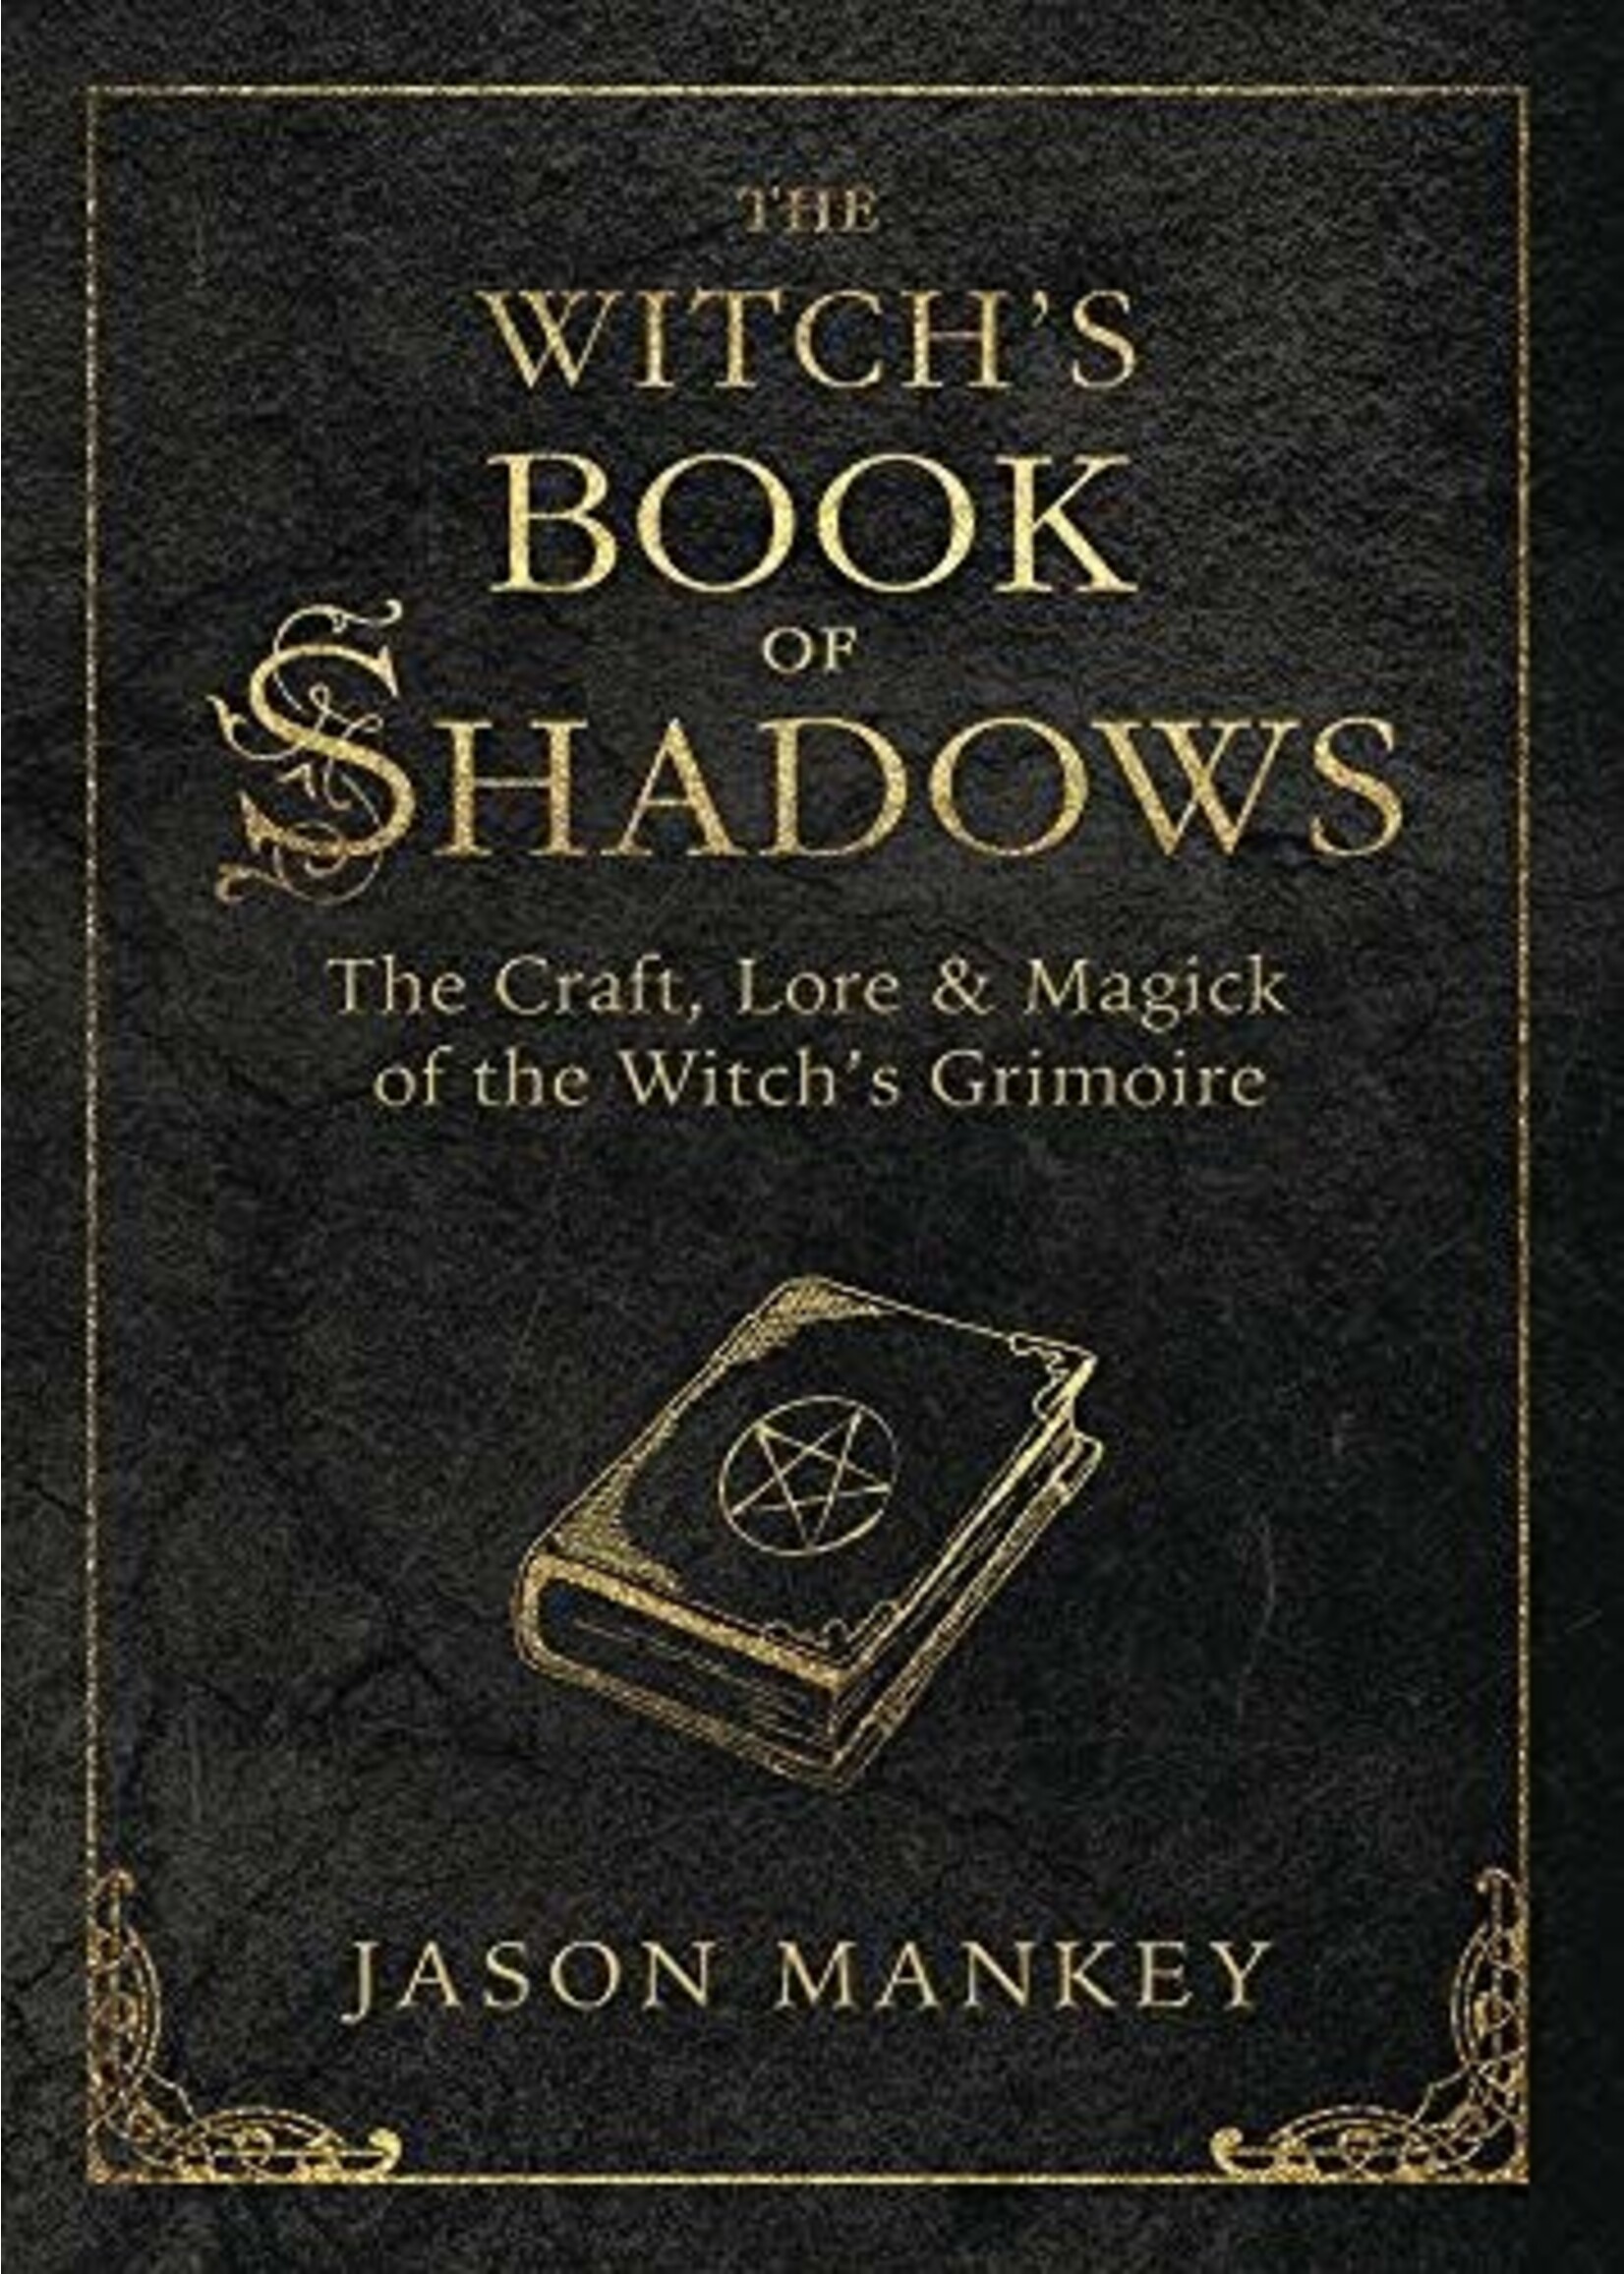 The Witch's Book of Shadows: The Craft, Lore and Magick of the Witch's Grimoire by Jason Mankey